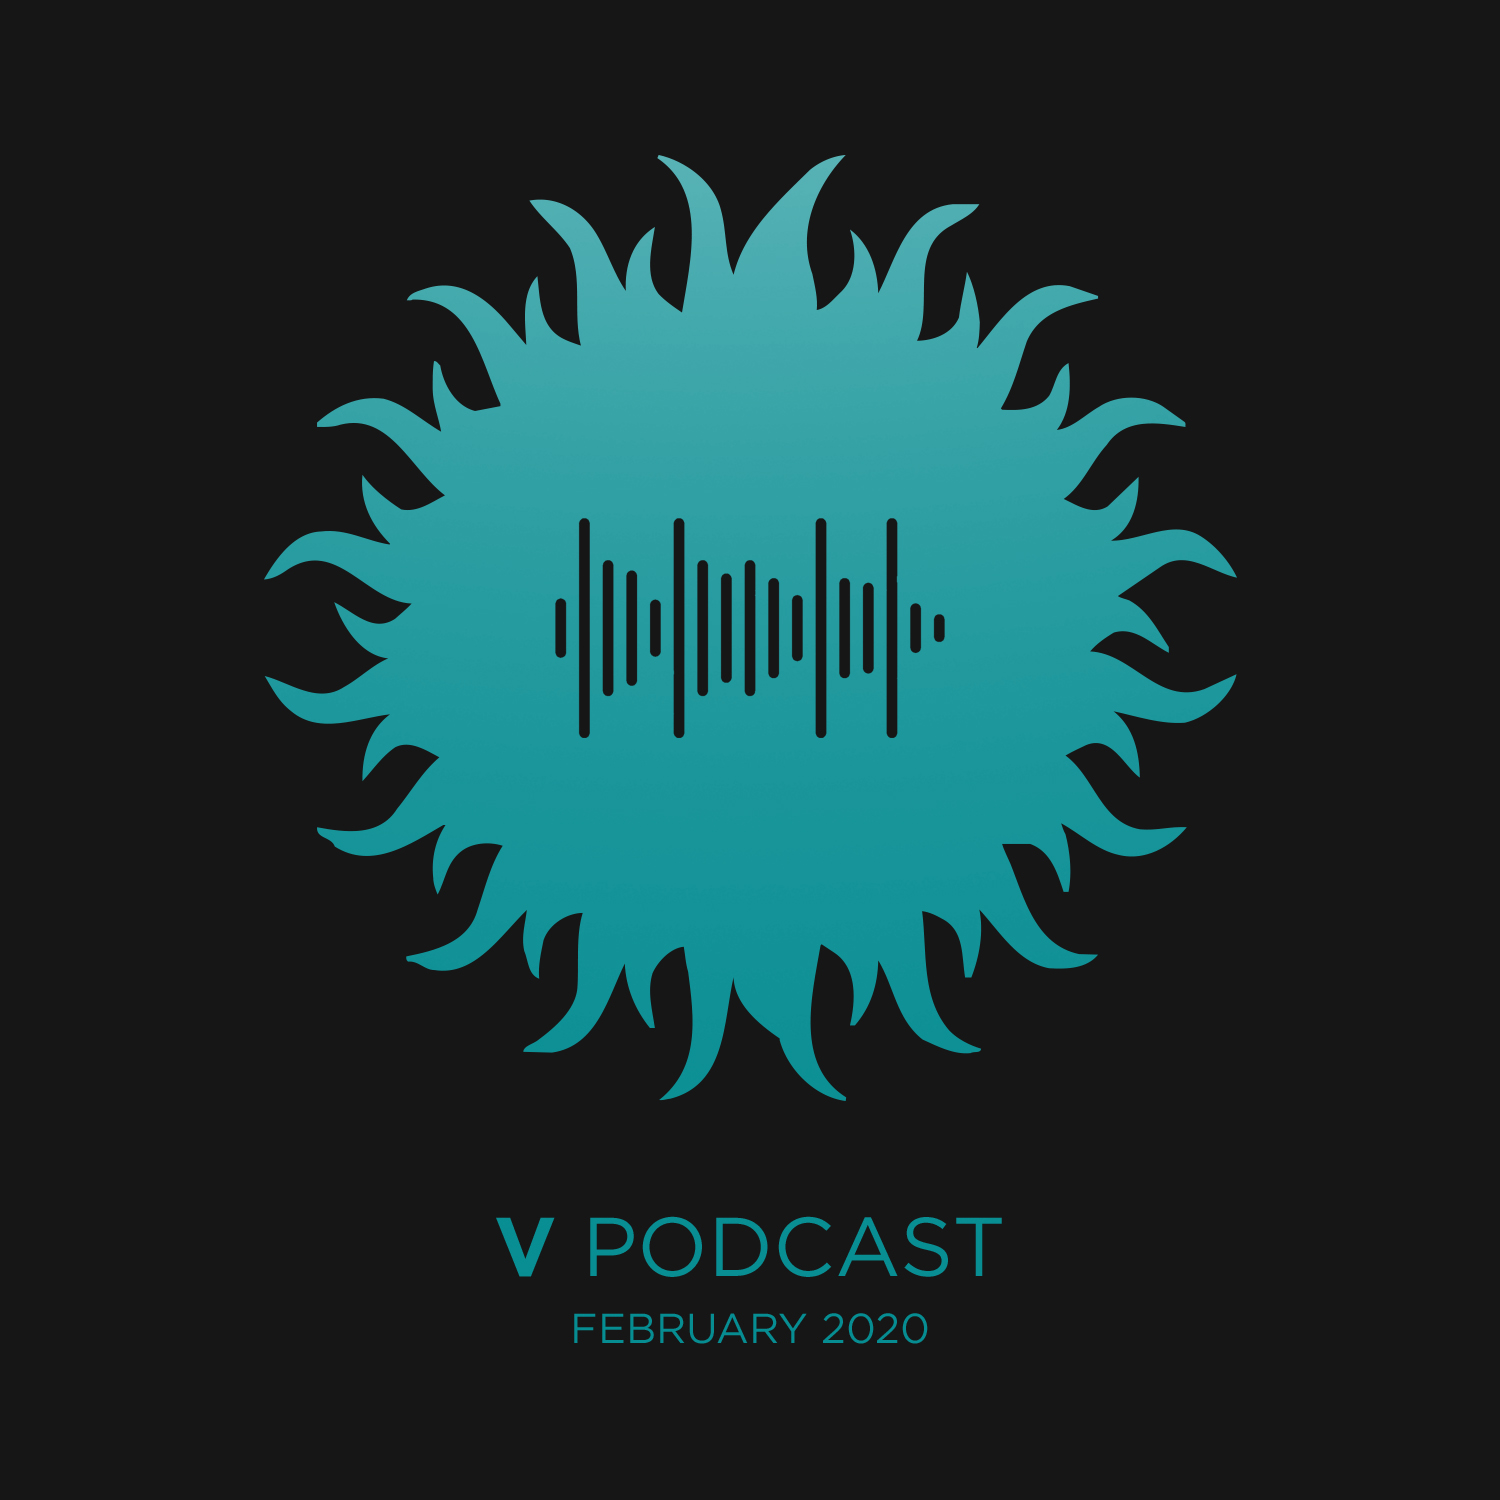 V Podcast 086 - Drum and Bass - hosted by Bryan Gee Artwork